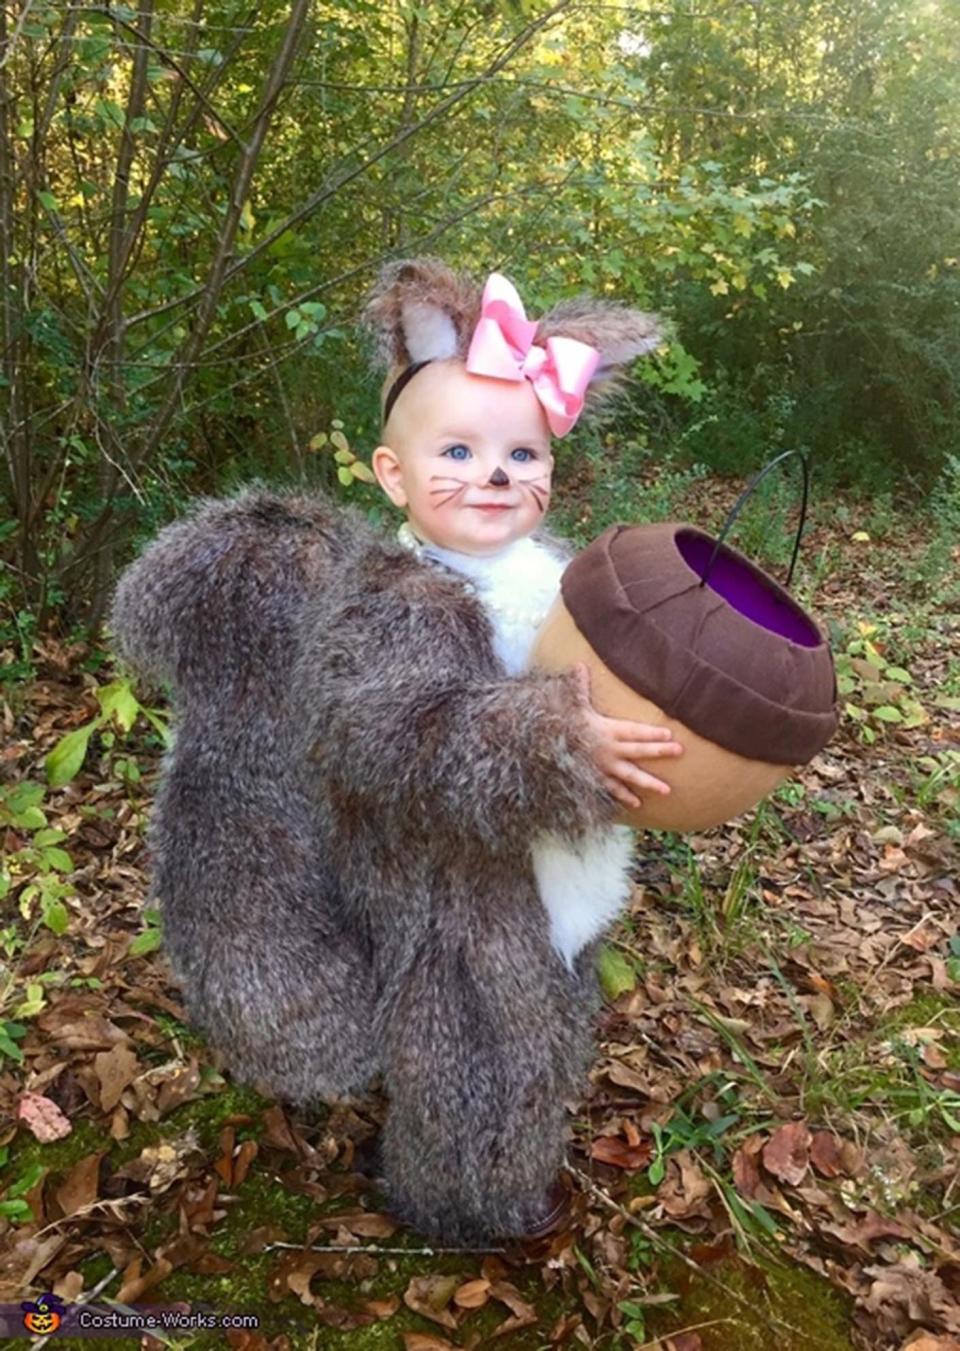 Via <a href="http://www.costume-works.com/baby-squirrel.html" target="_blank">Costume Works</a>